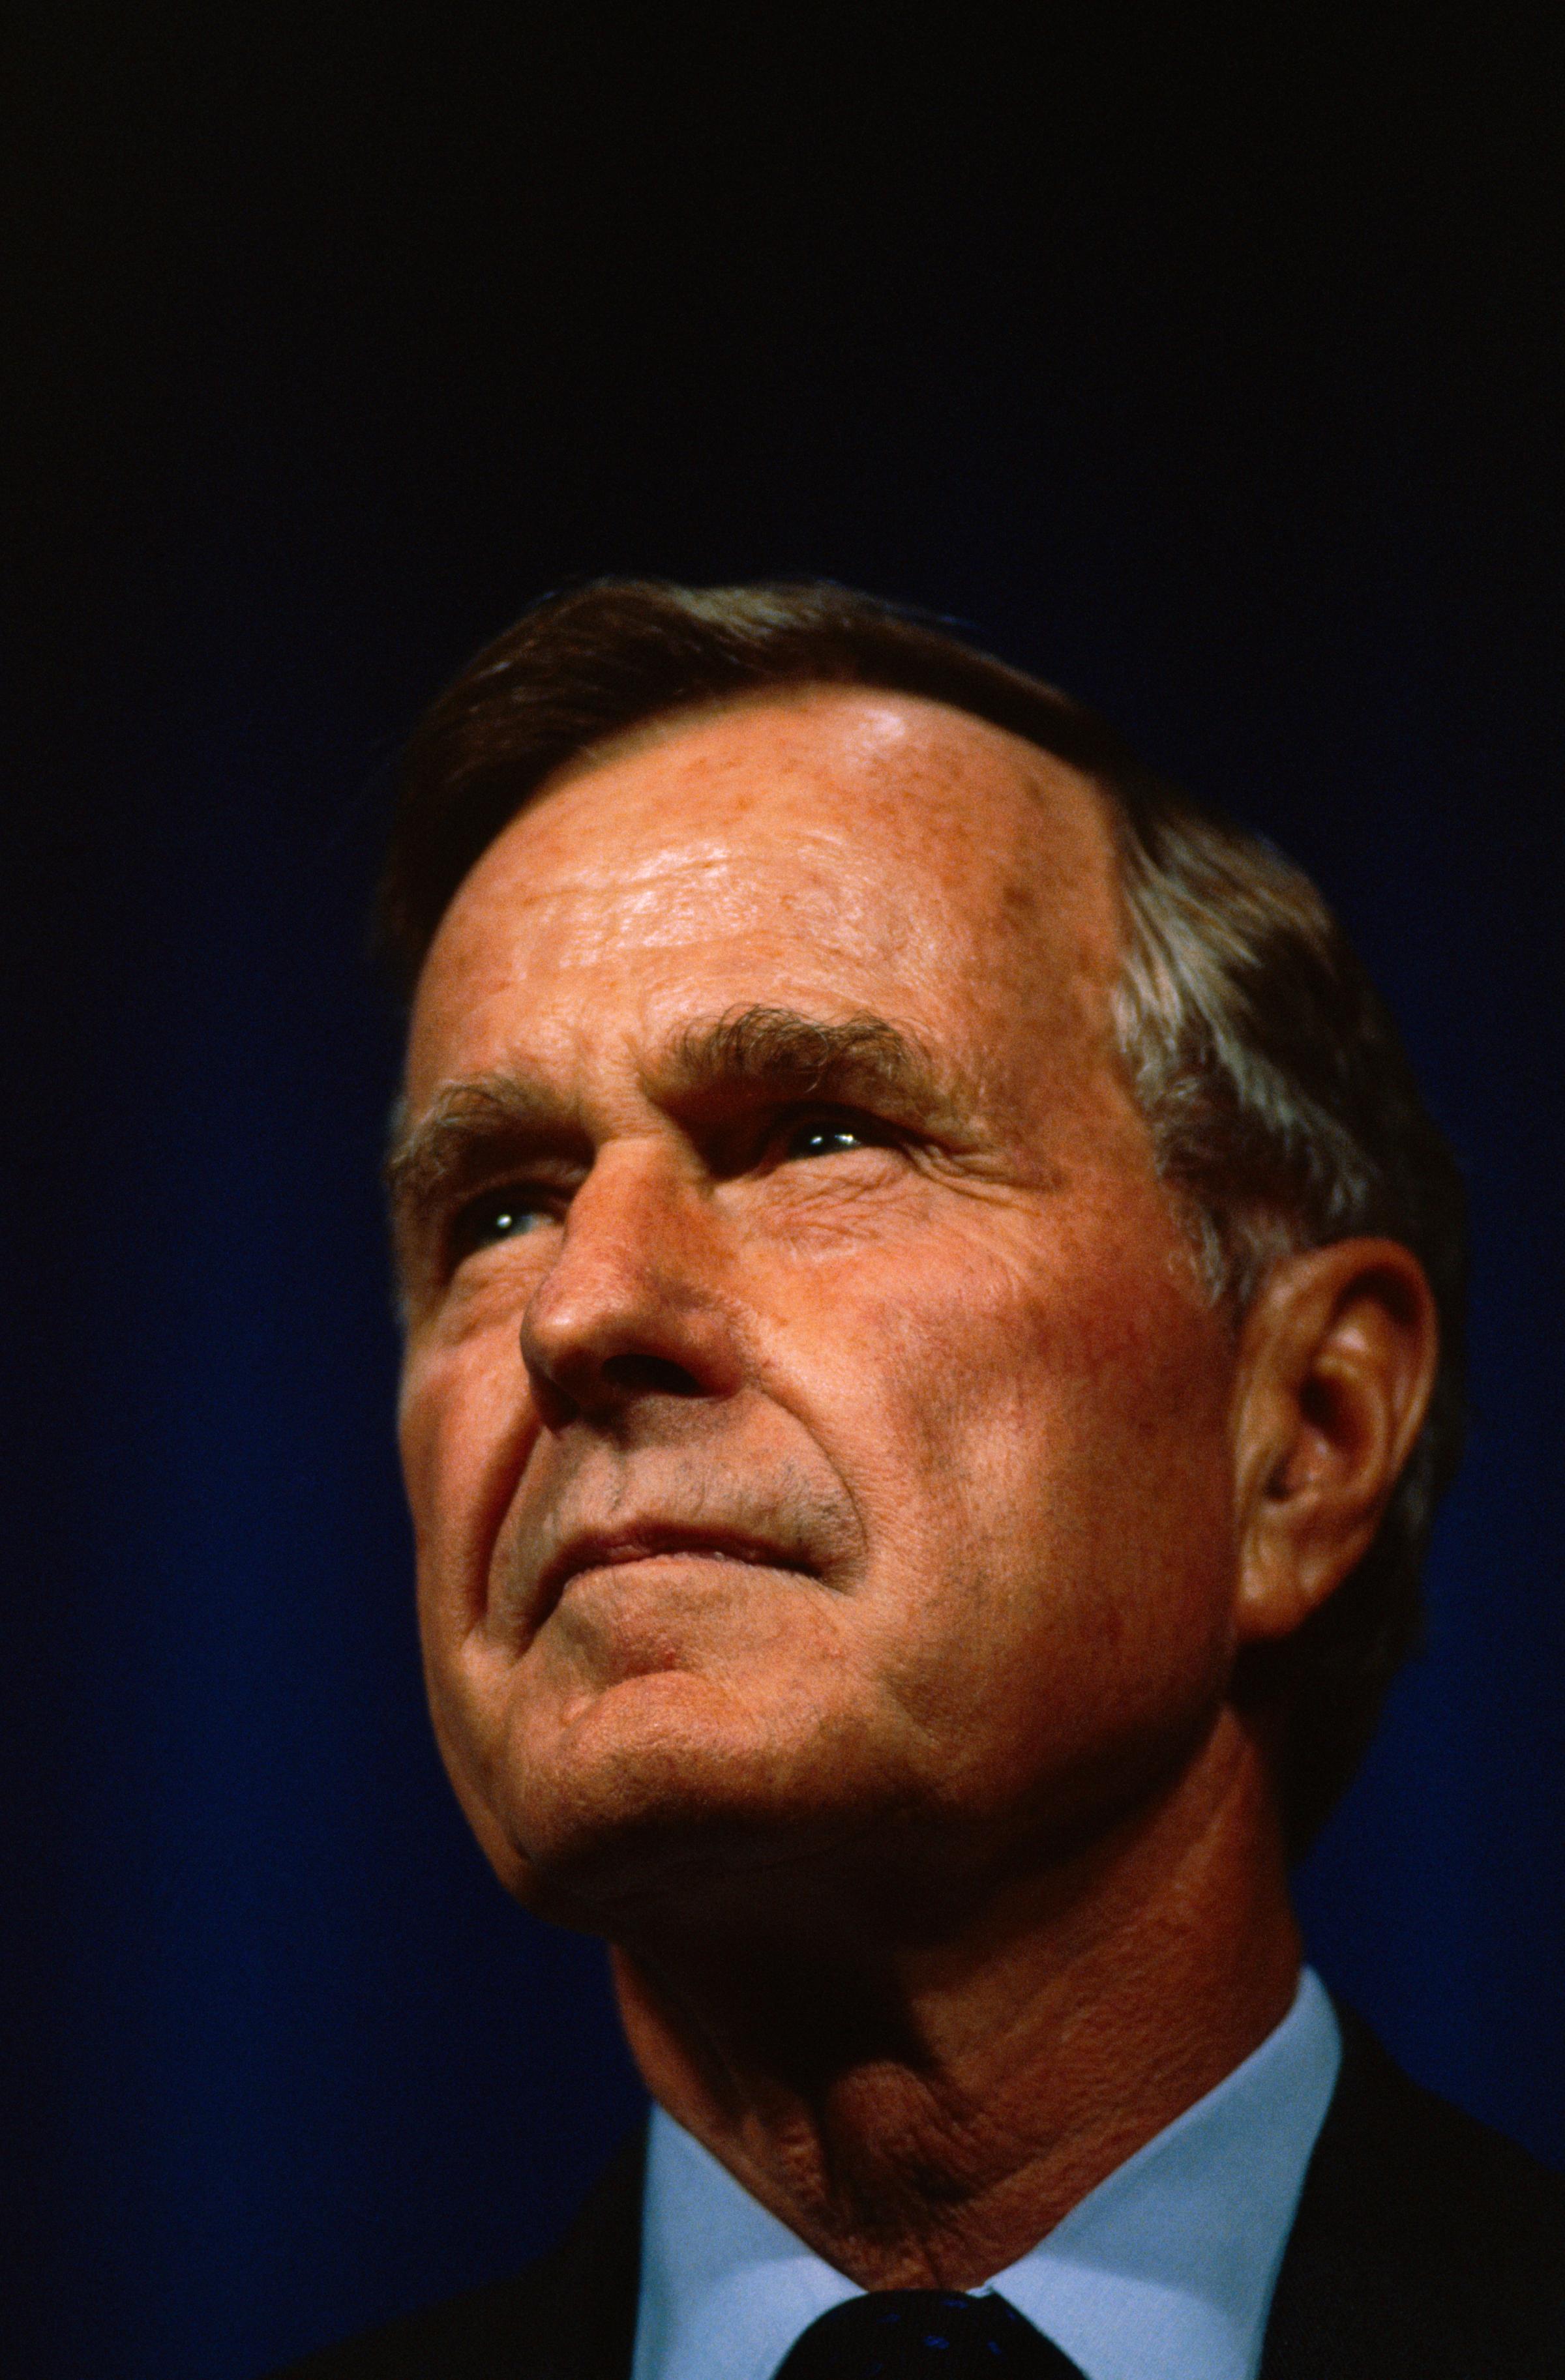 George H.W. Bush attends a dedication at the George R. Brown Convention Center in Houston, Texas on October 1, 1993.